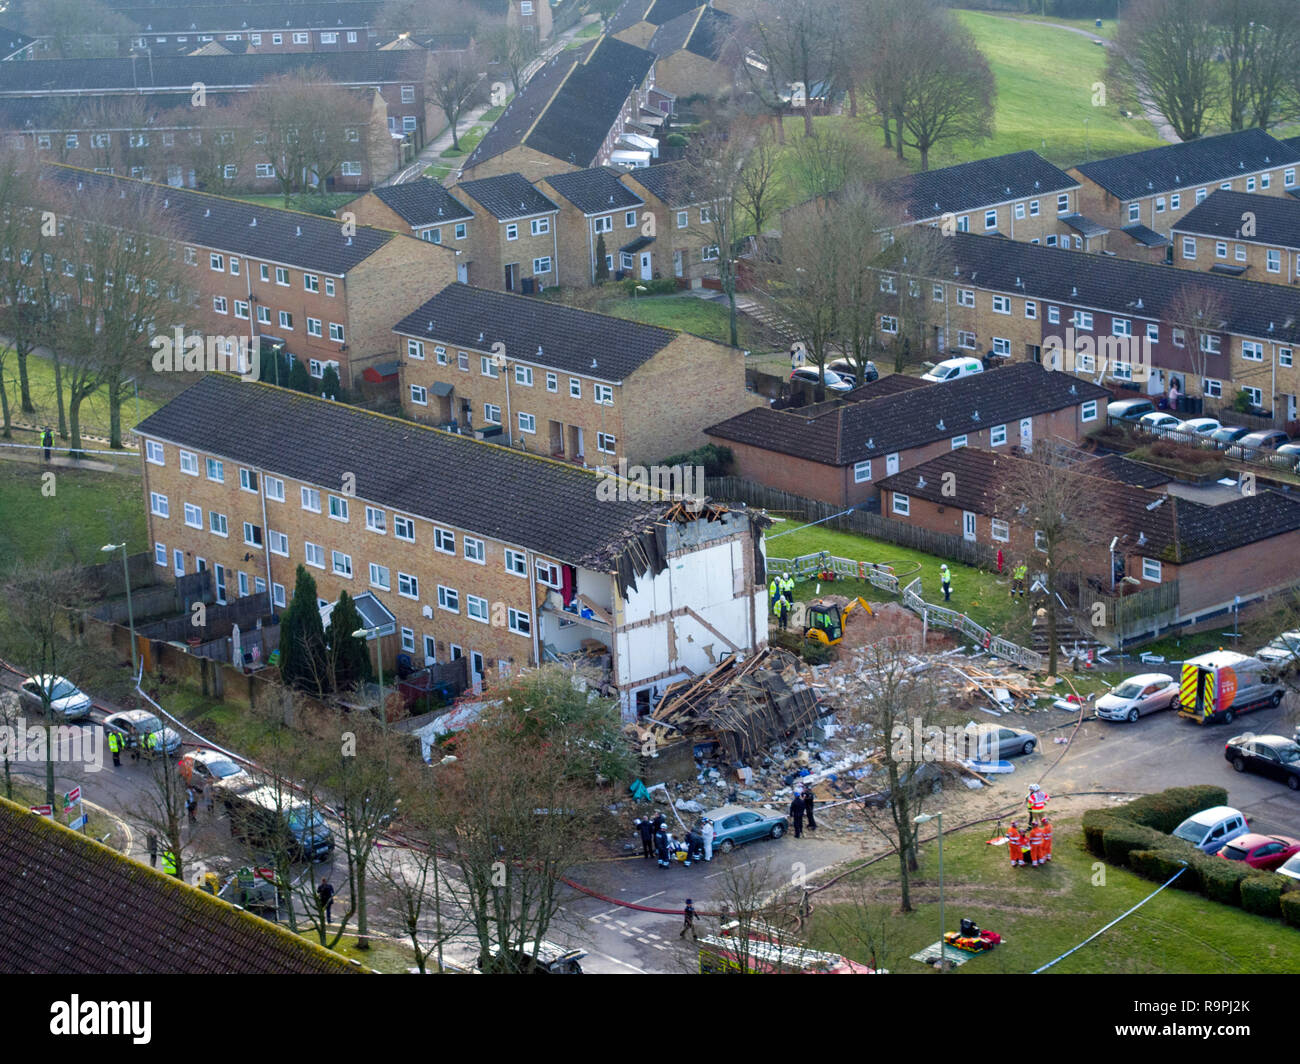 An aerial view of the scene in Launcelot Close, Andover, where Hampshire Police say that the body of a man has been found after an explosion caused a building to collapse this morning. Stock Photo